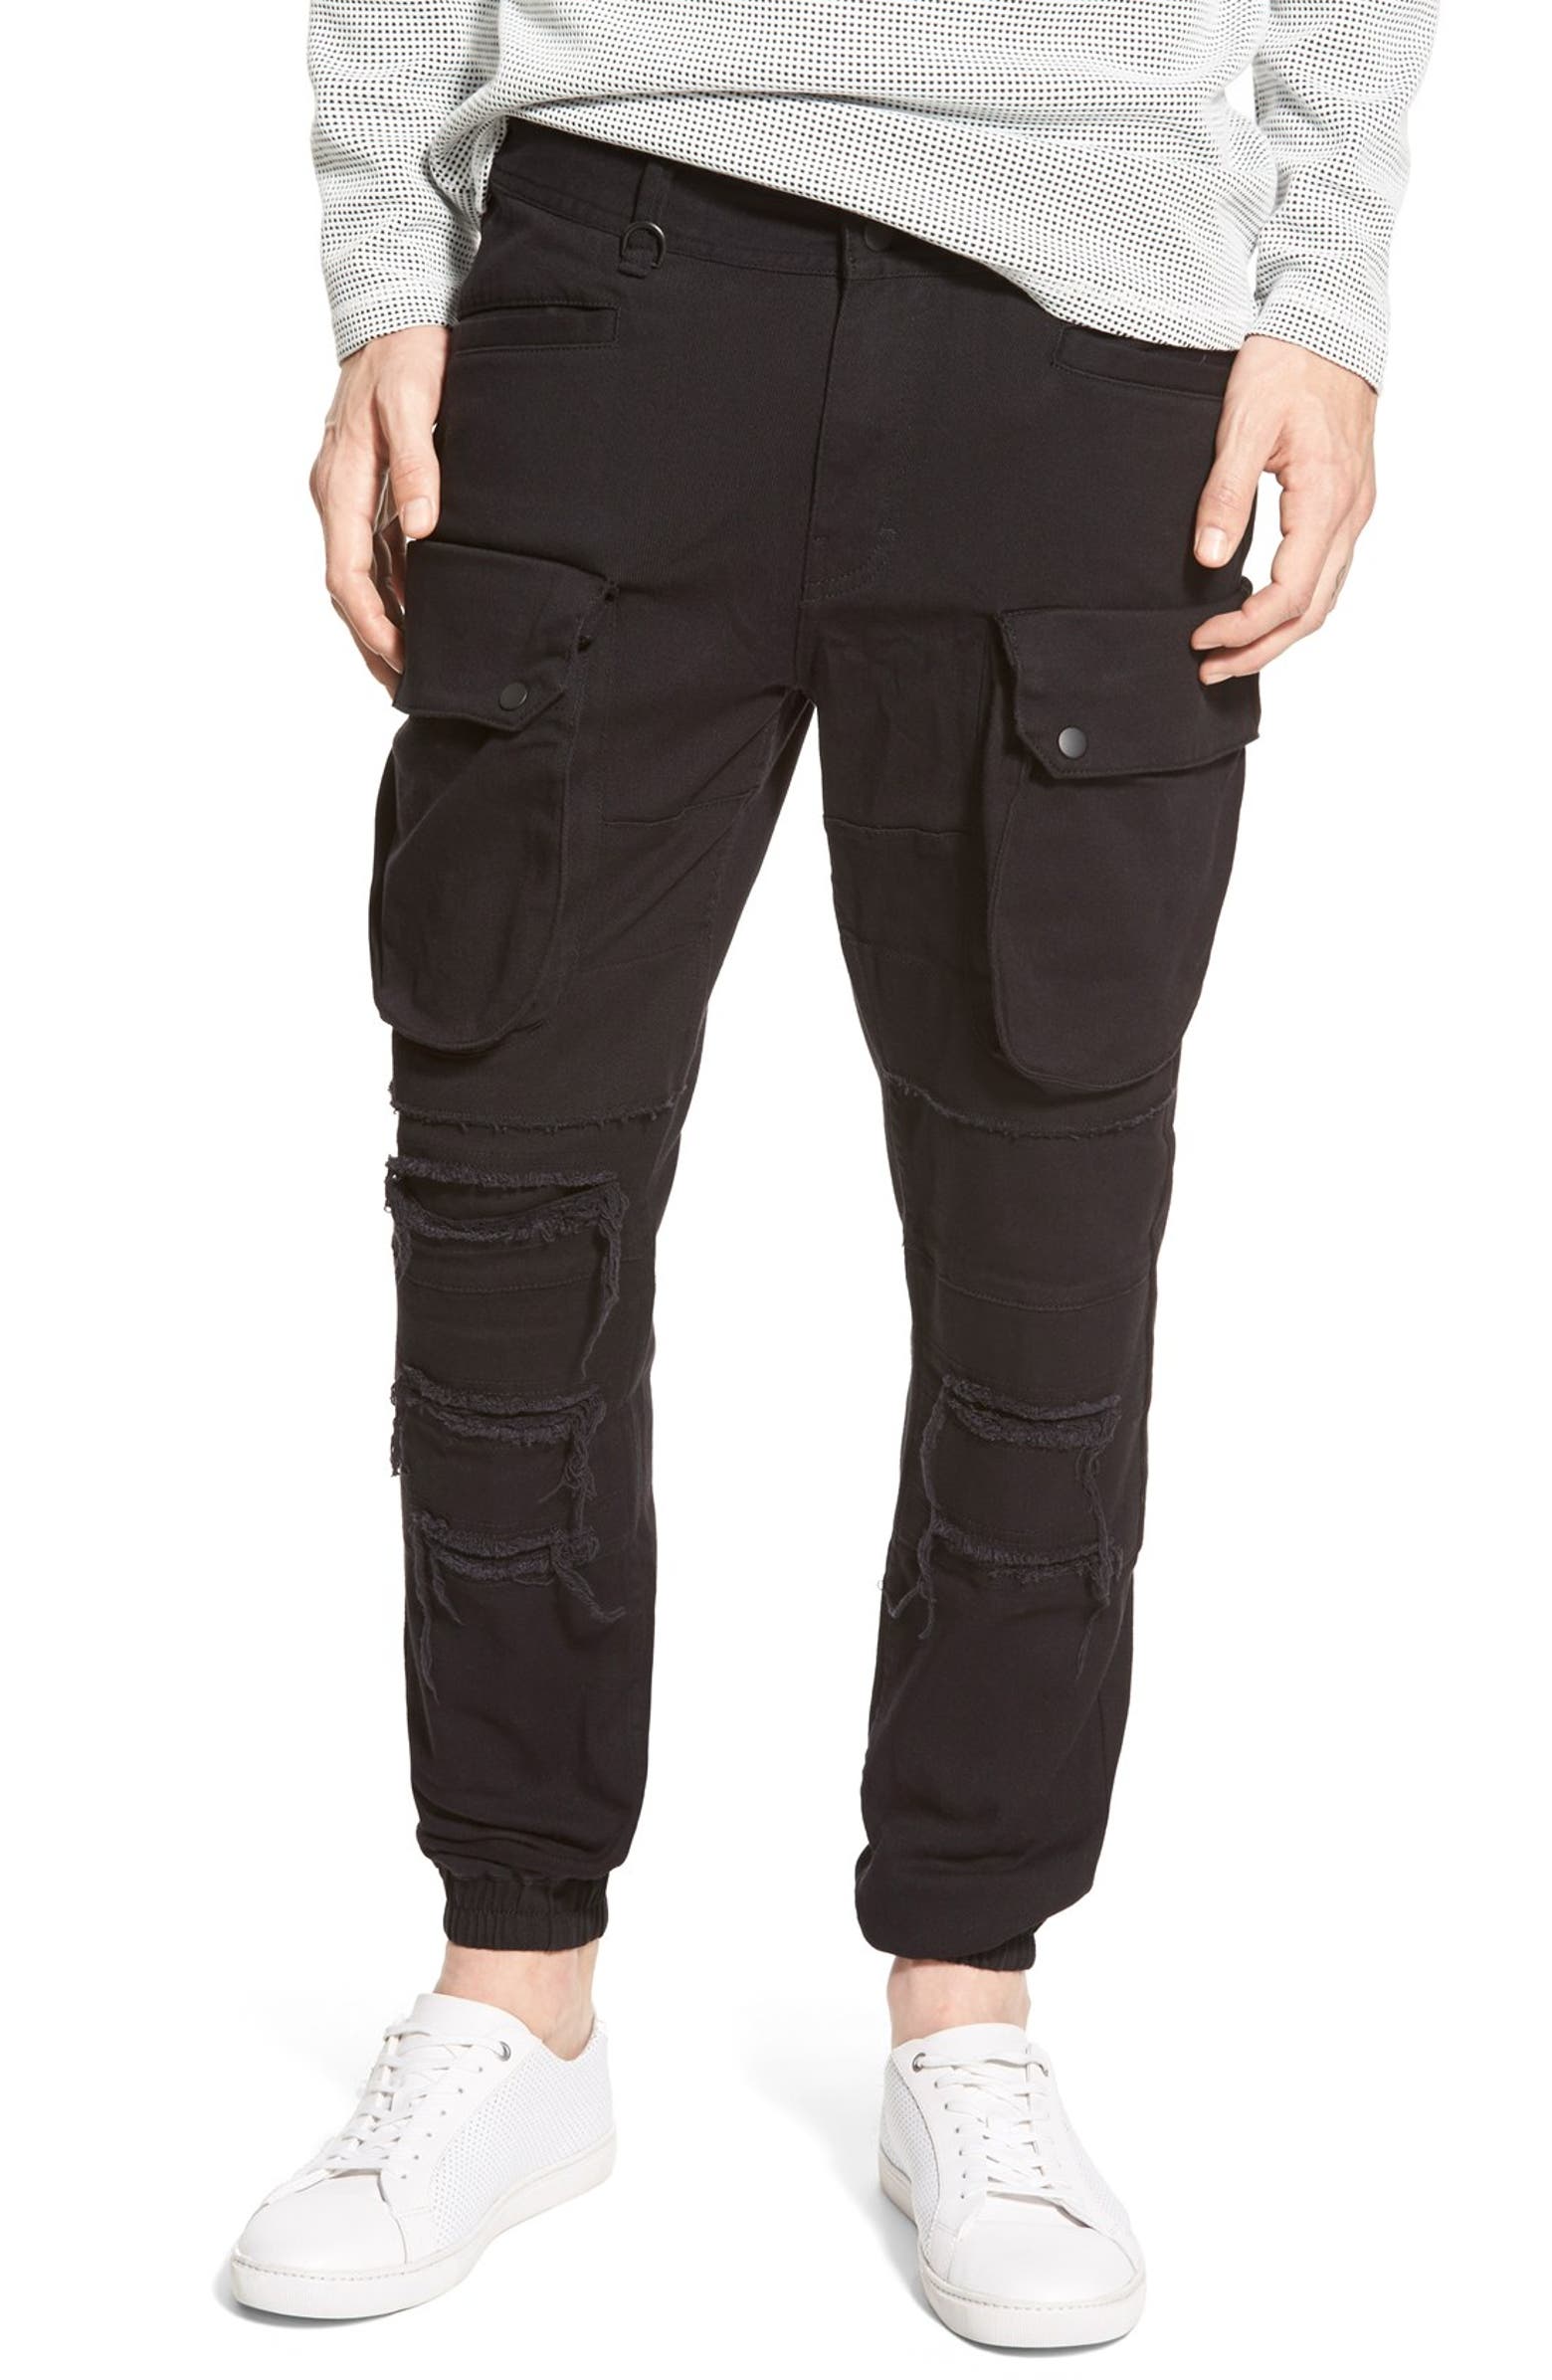 PUBLISH BRAND 'Crow' Woven Cargo Jogger Pants | Nordstrom